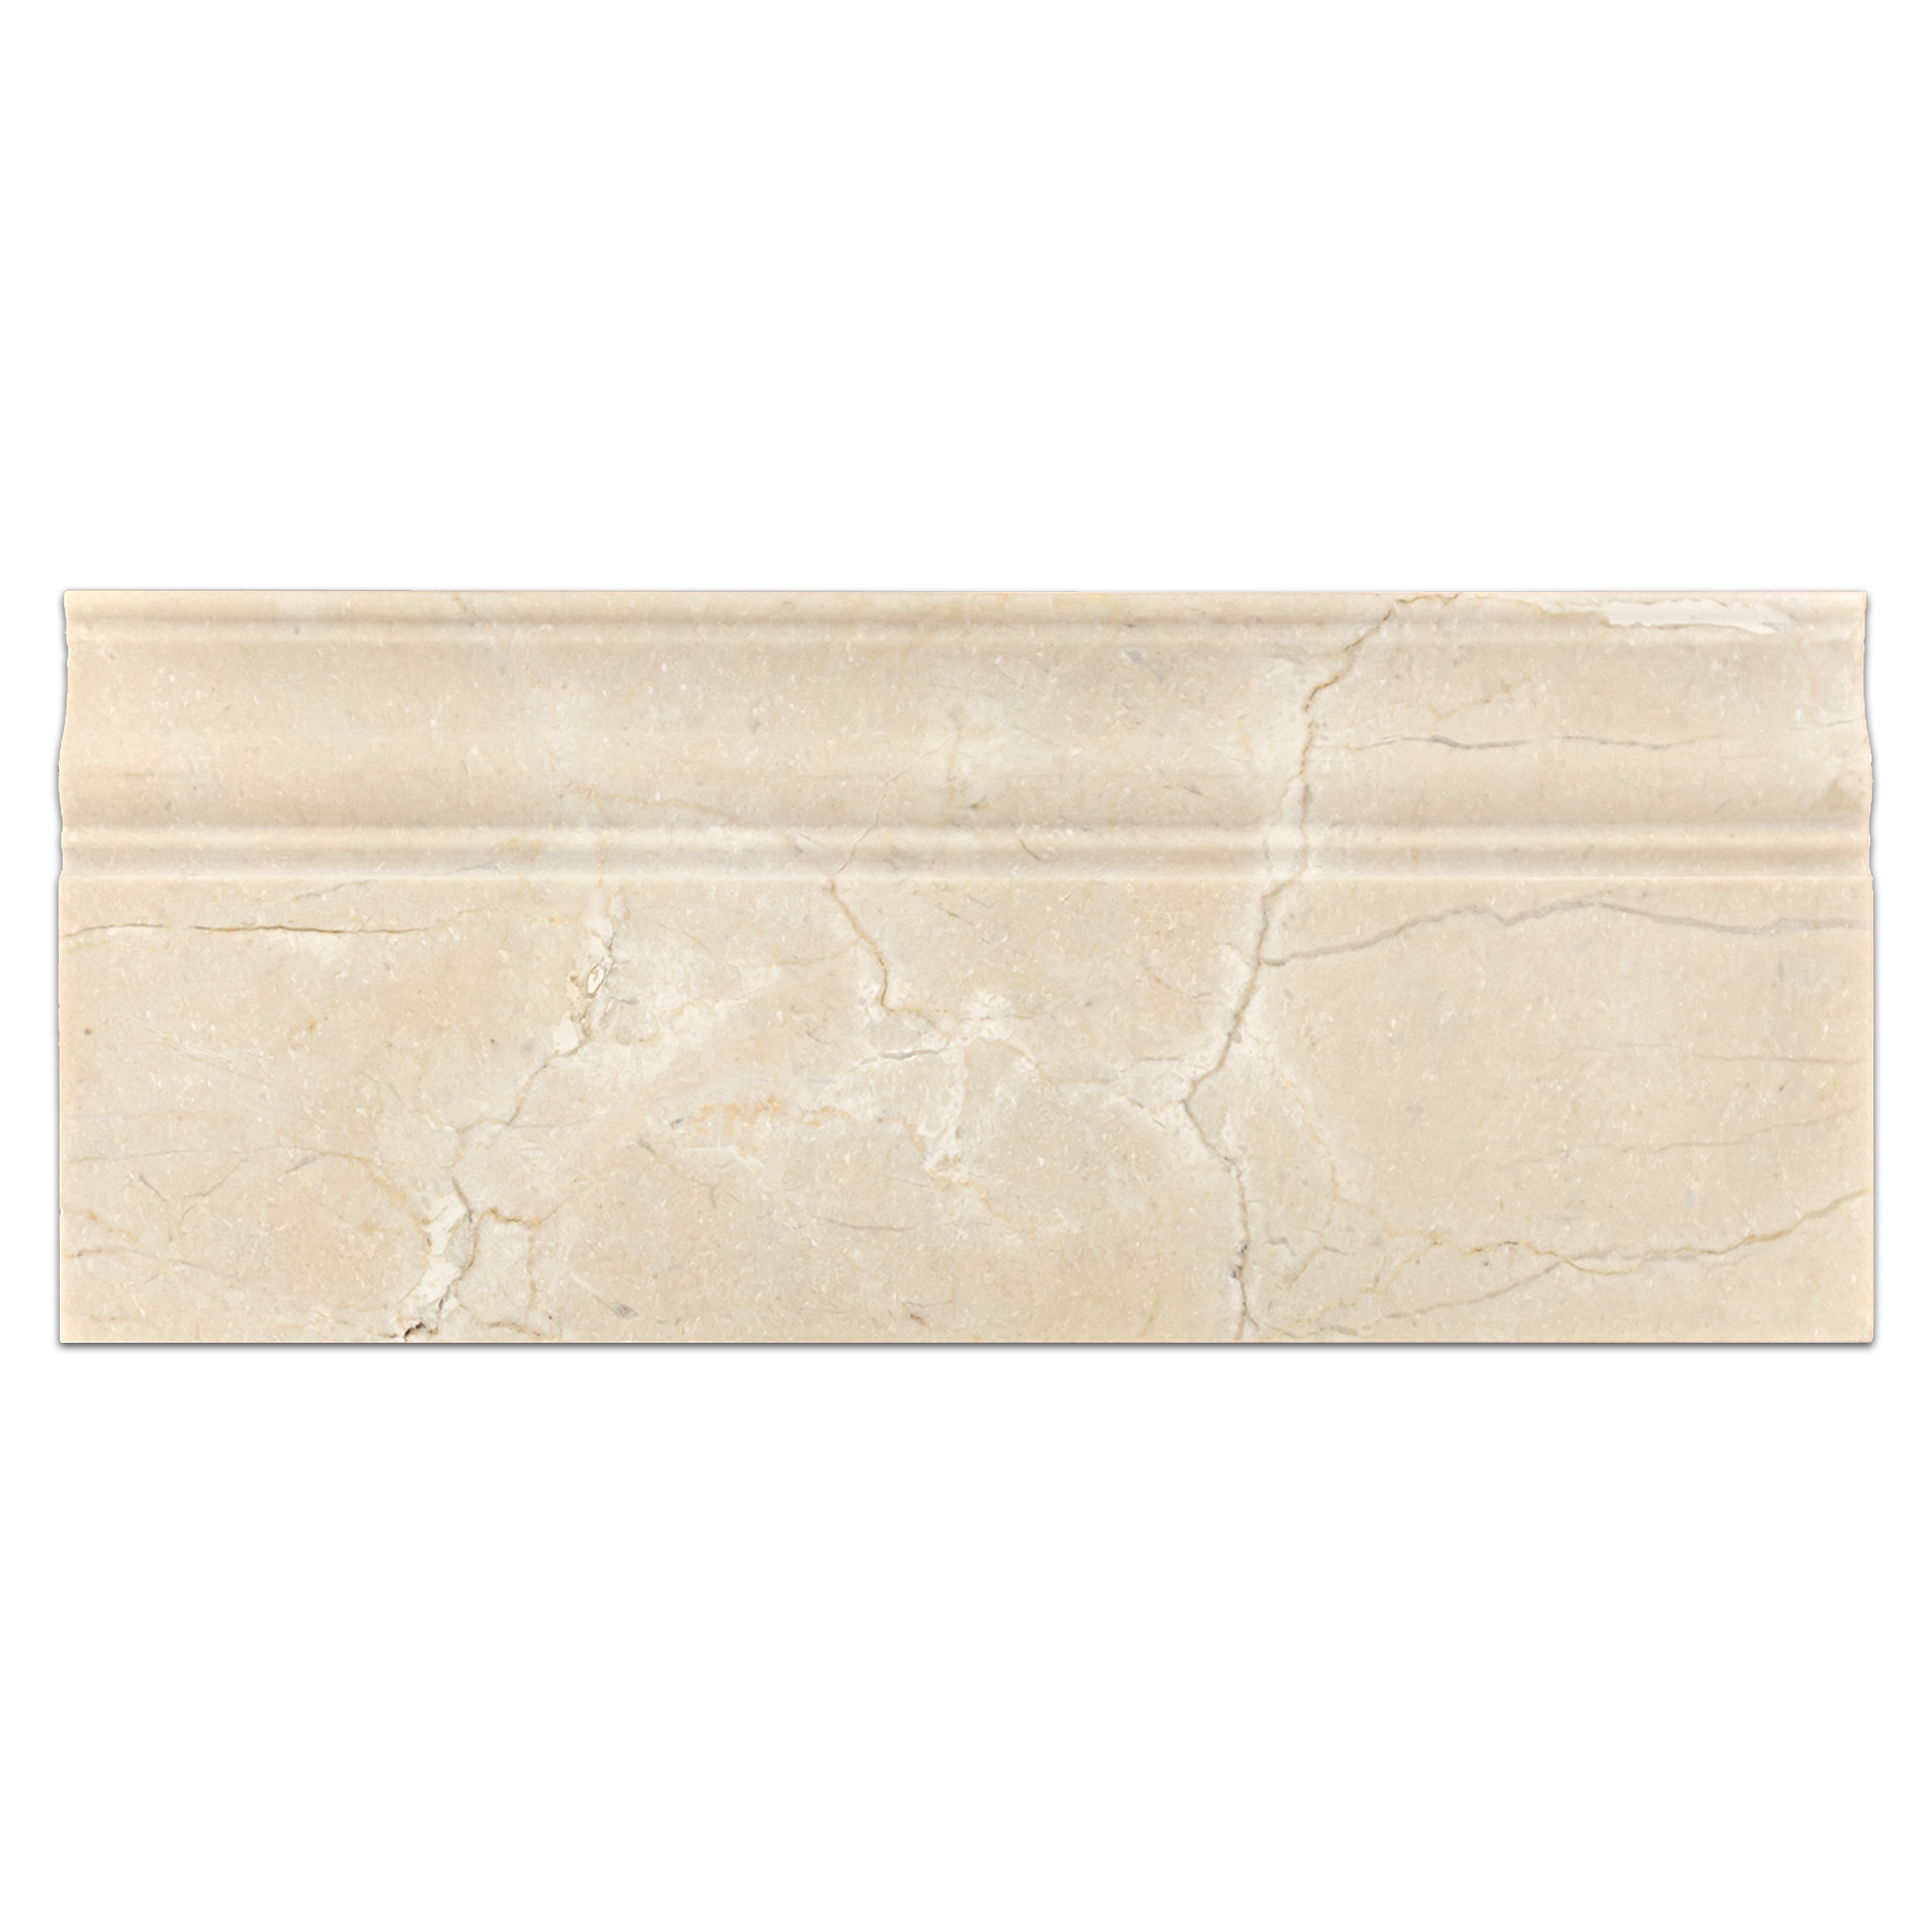 Elon Crema Marfil Marble Baseboard 4.75x12 Honed Tile from Surface Group International.